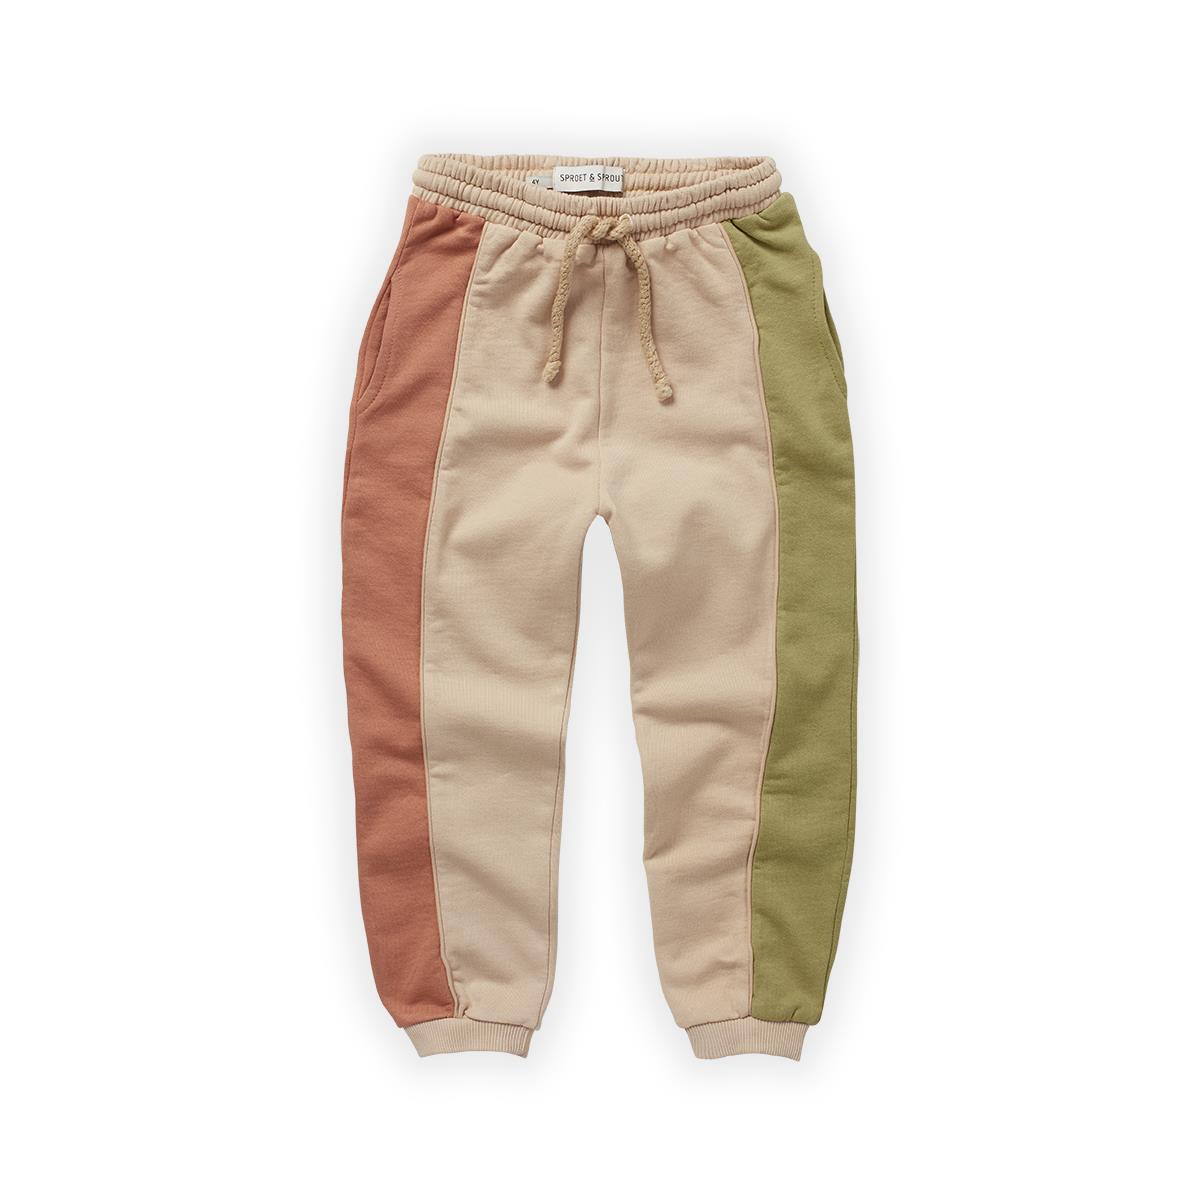 Sproet & Sprout - Track pants colourblock